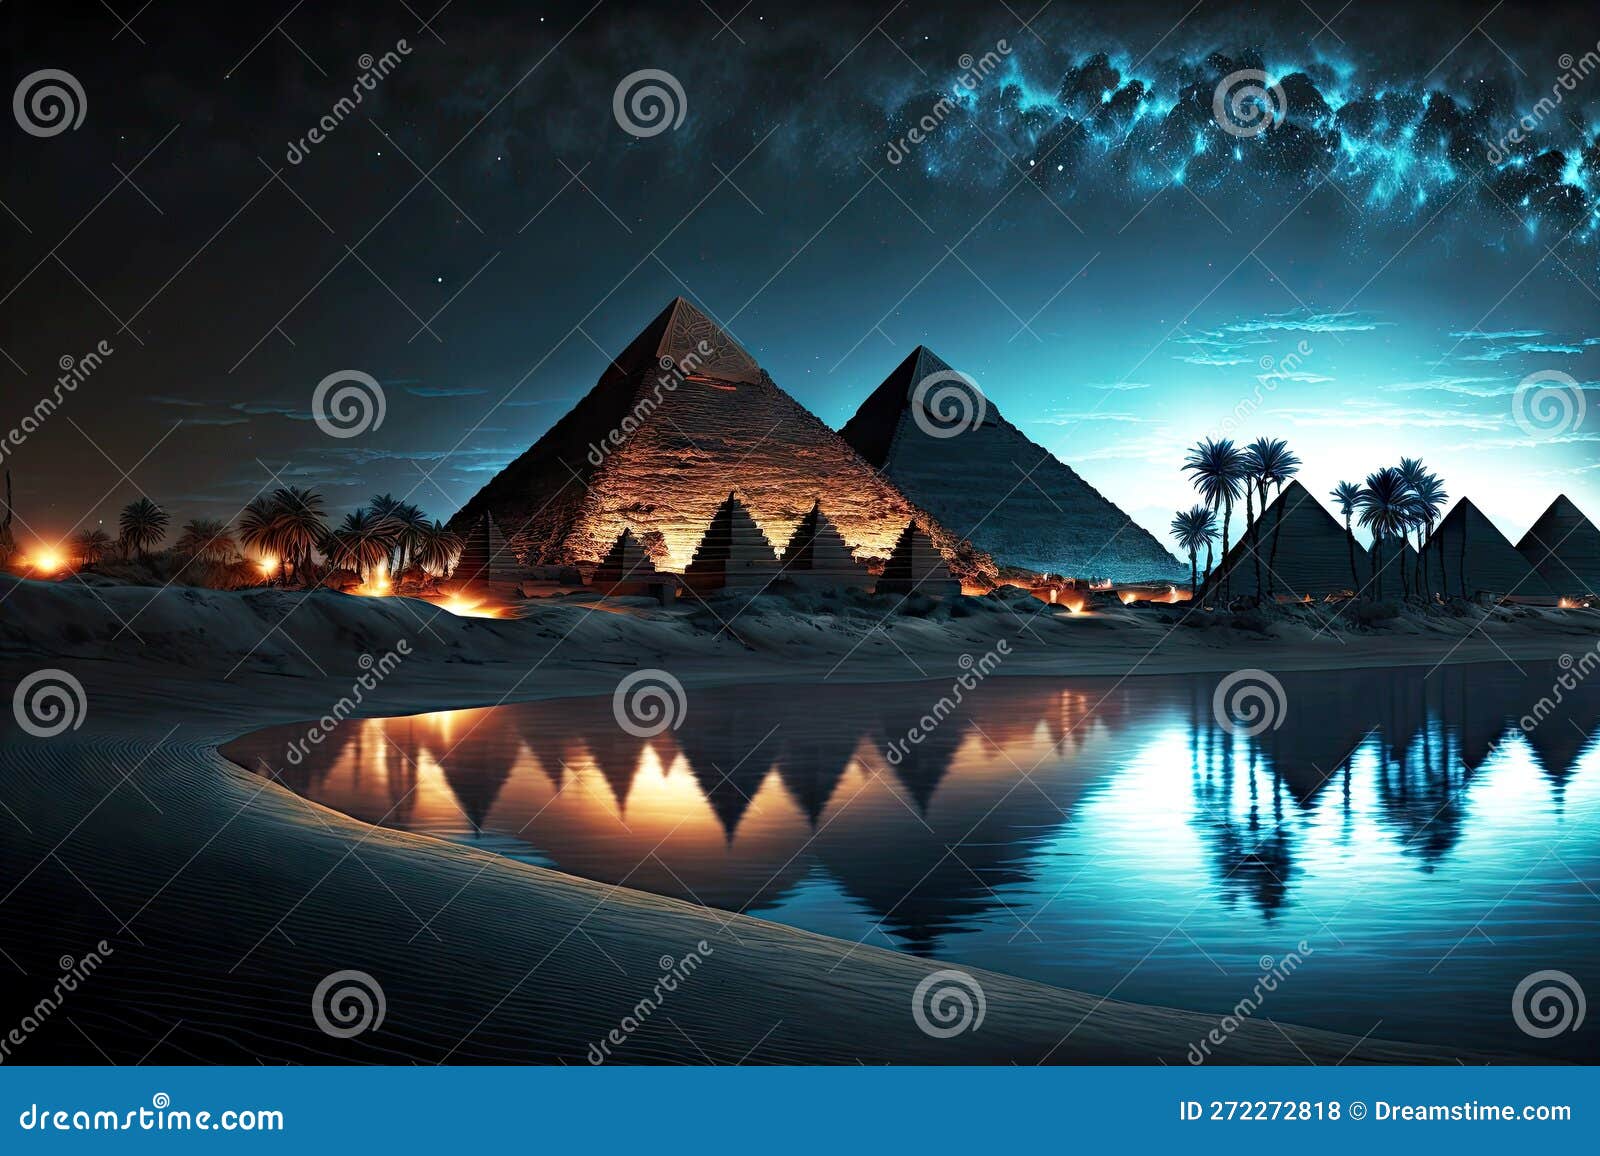 Beaful Night Scenery with Egyptian Pyramids Located on Shore of ...